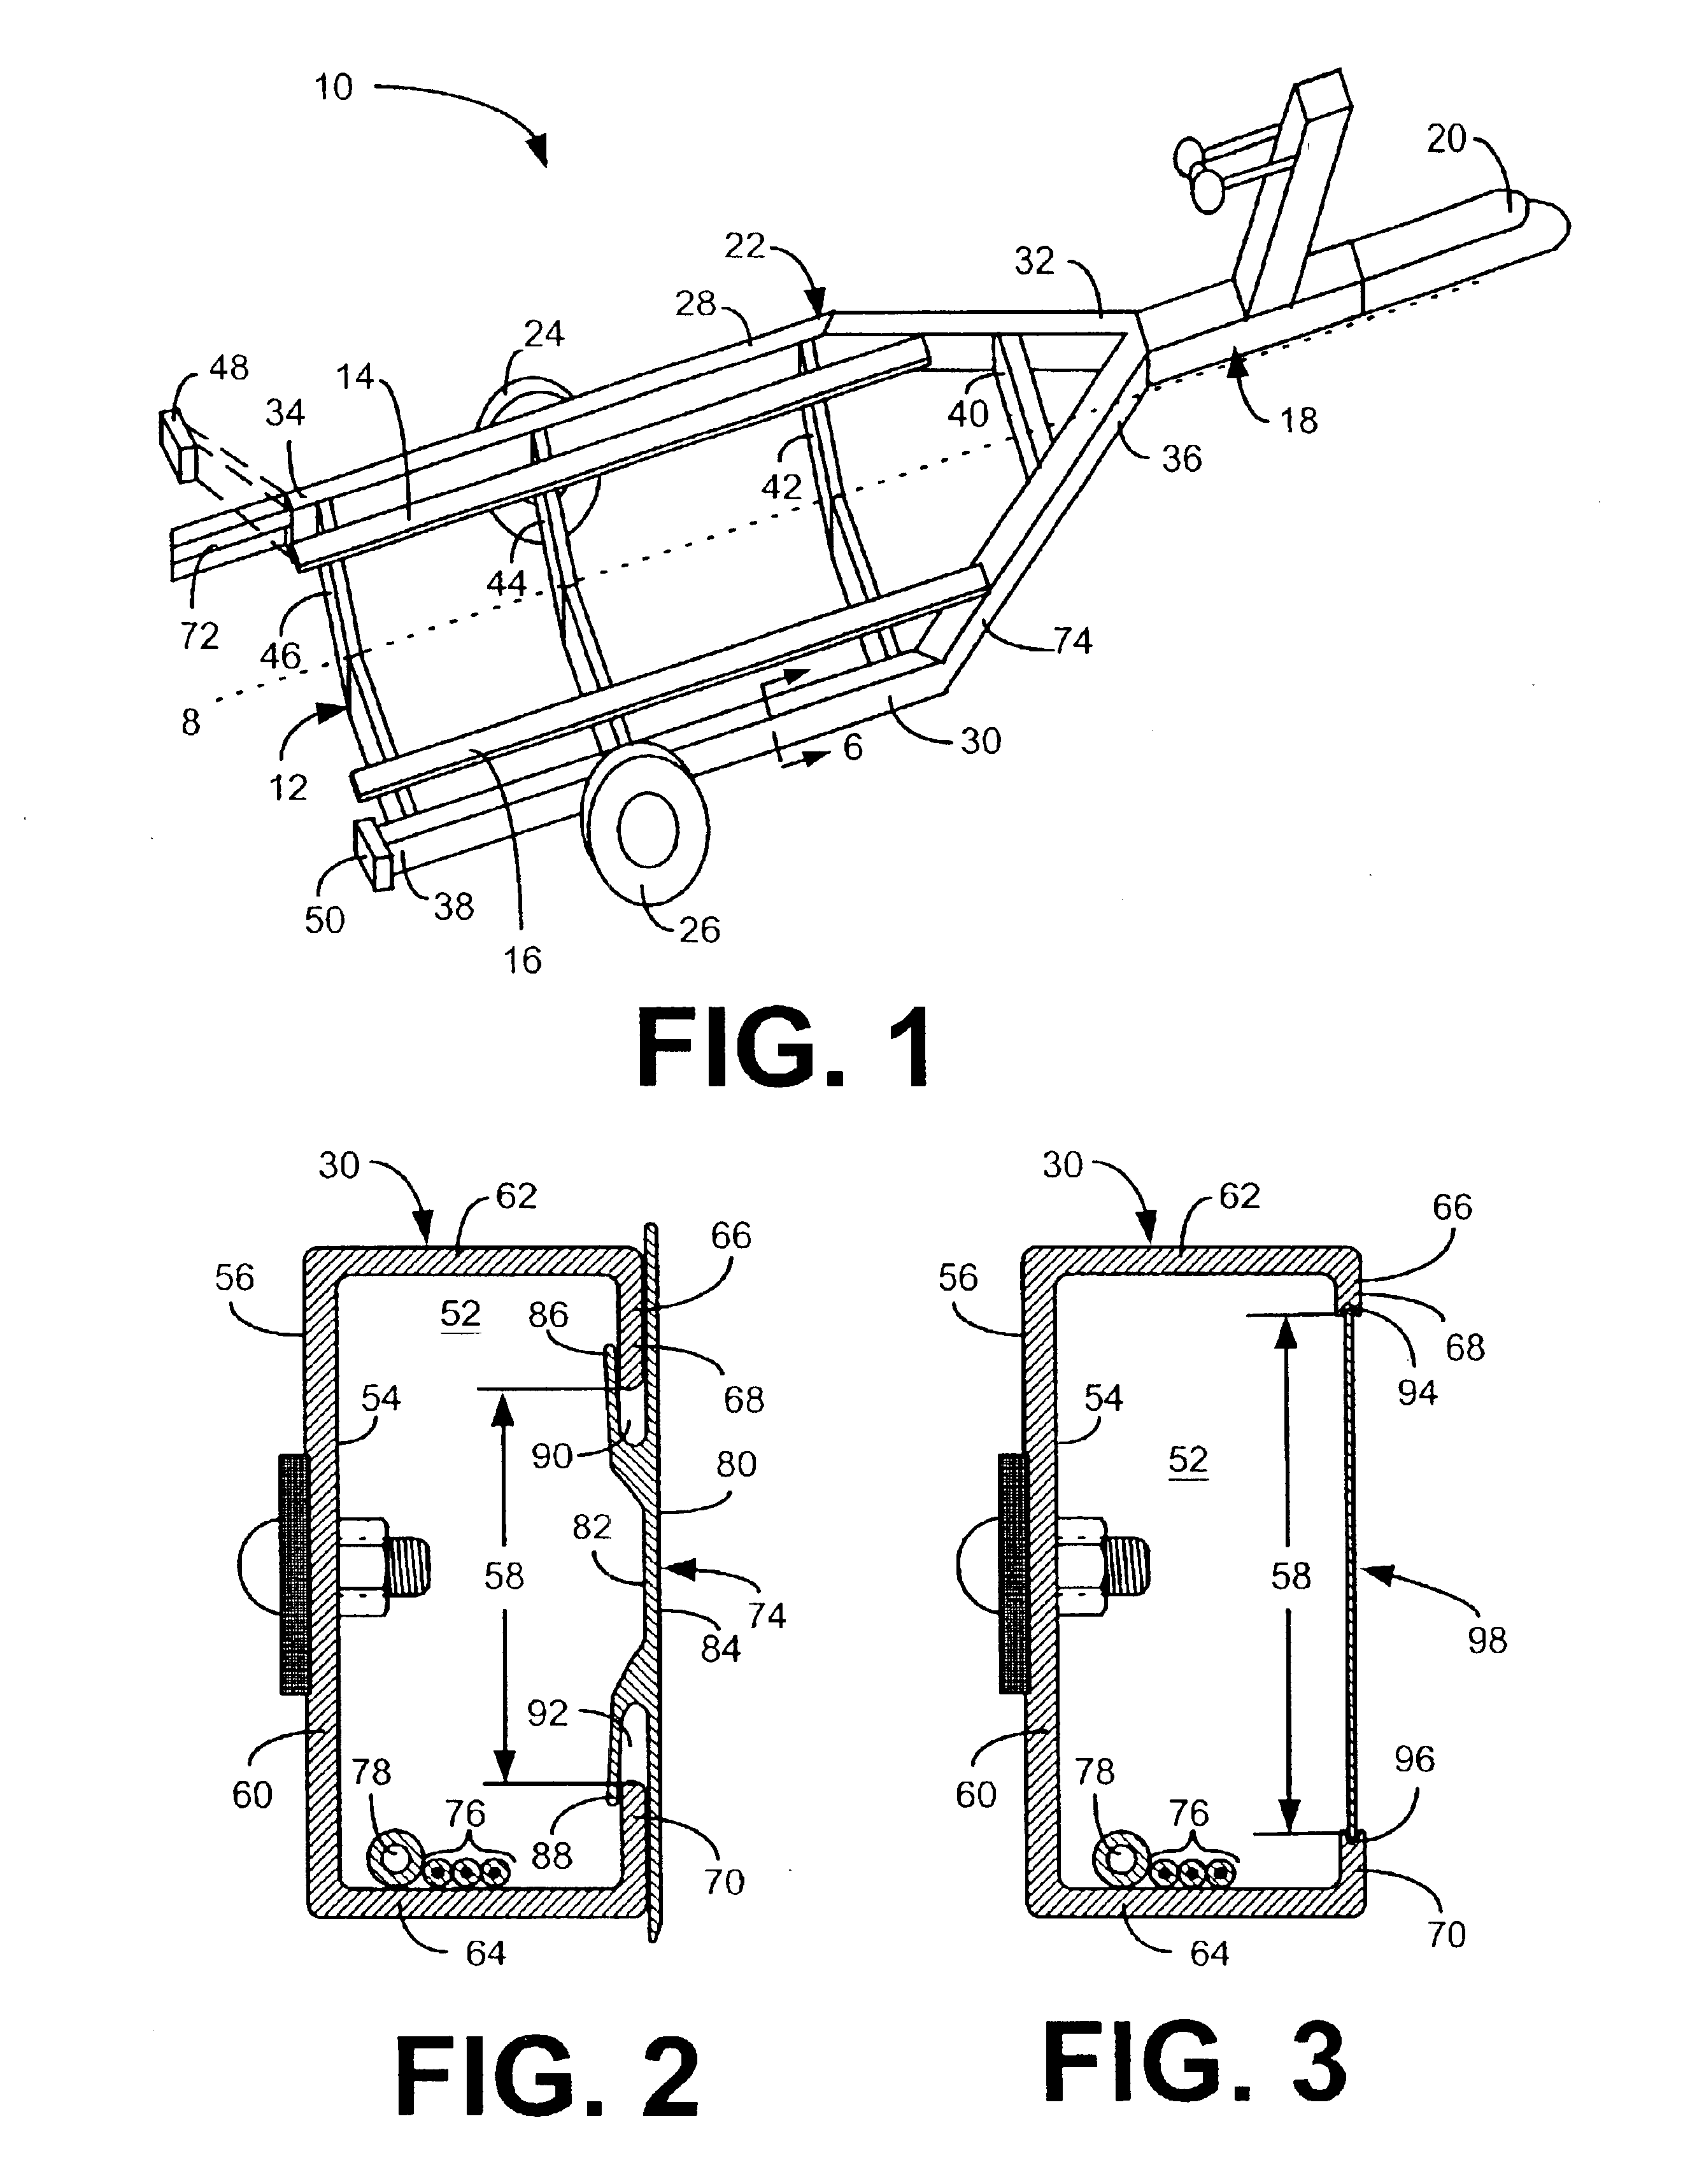 Boat trailer with closed longitudinal support beams